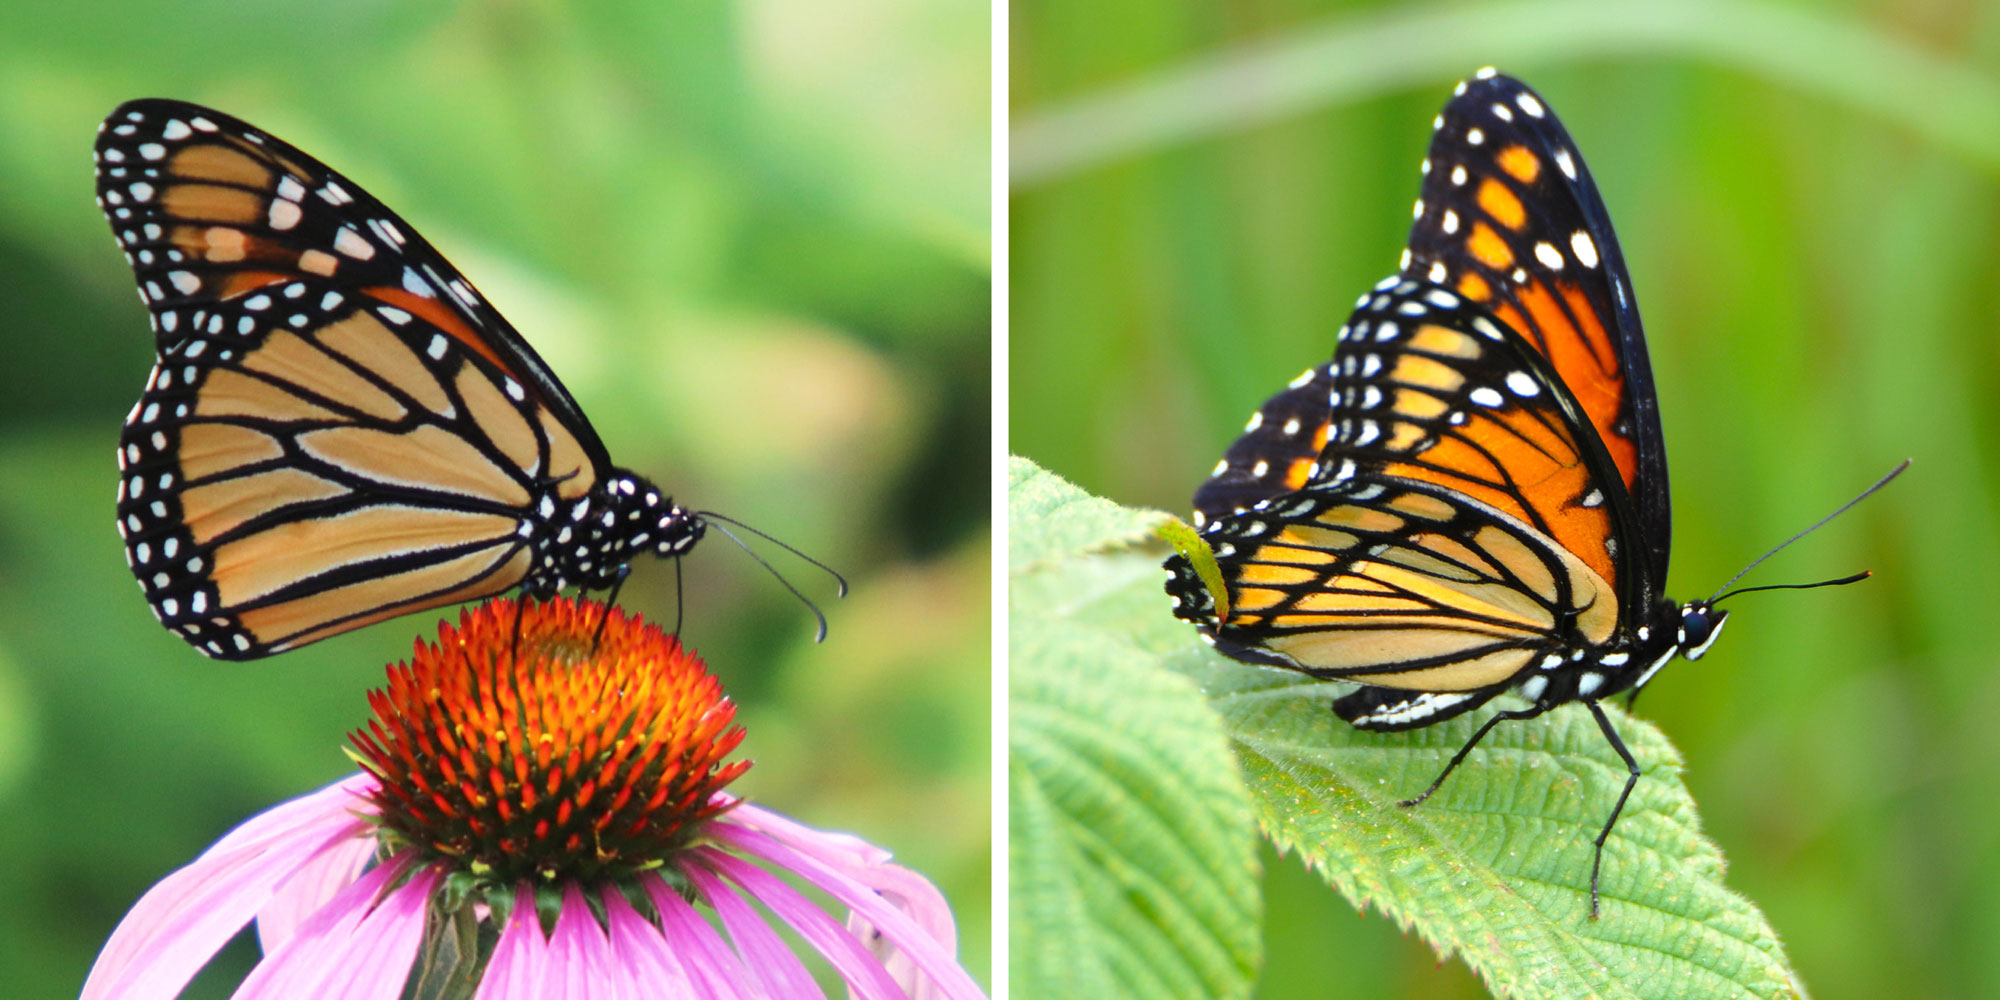 A side-by-side view of a monarch and viceroy butterfly.